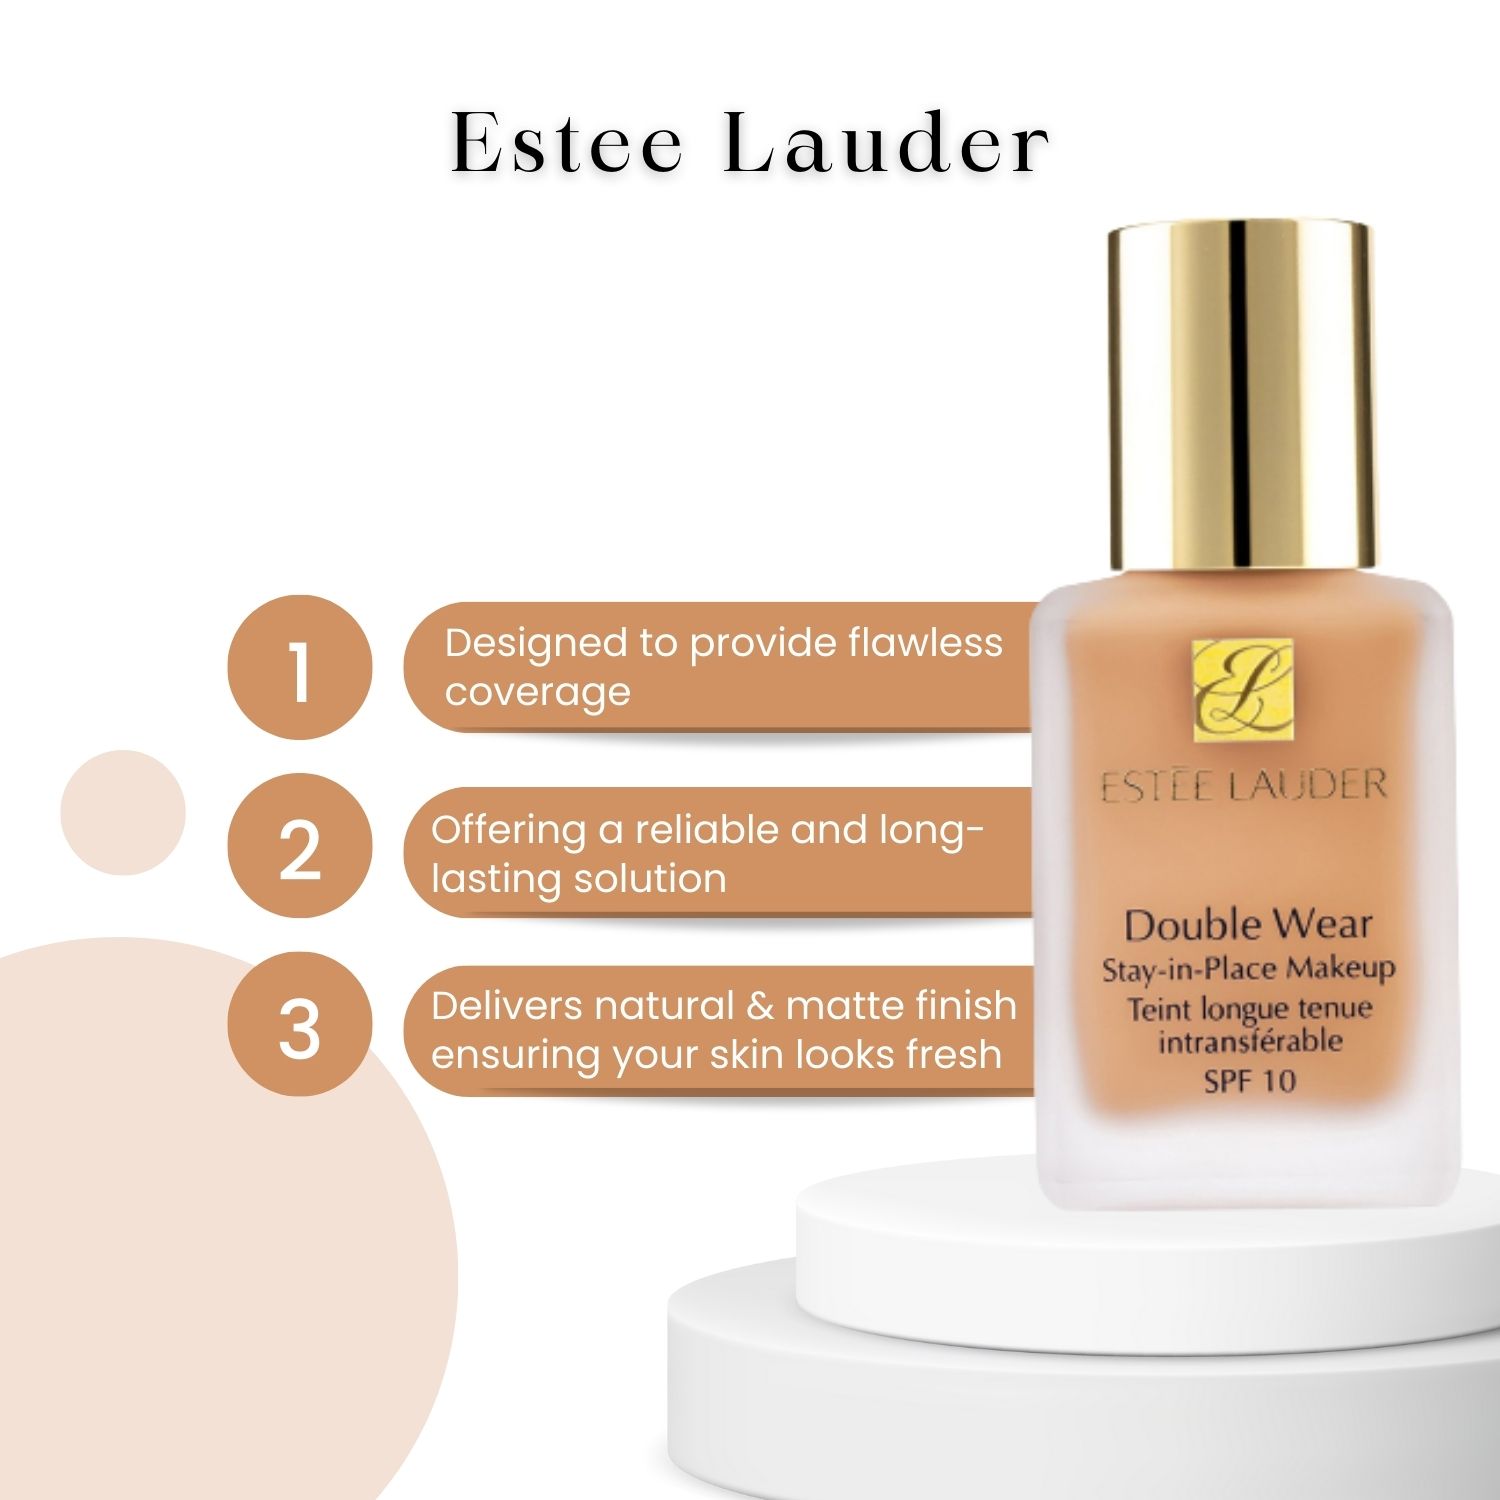 Estee Lauder Double Wear Stay-in Place Makeup Spf 10 - 2c1 Pure Beige 1 oz/30 ml - image 5 of 5